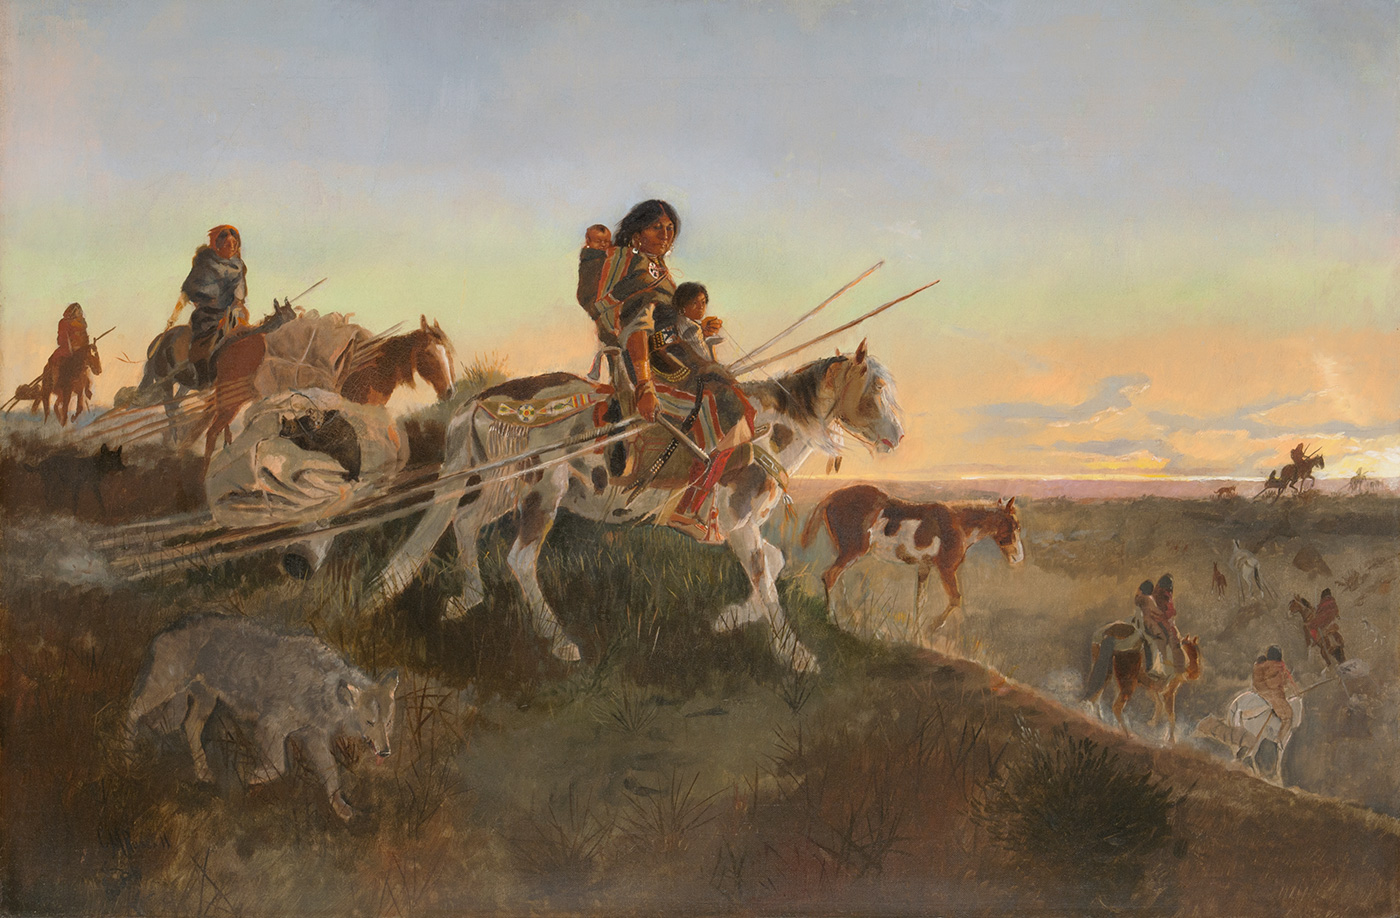 A group of indigenous American women and children ride horses through a hilly landscape.